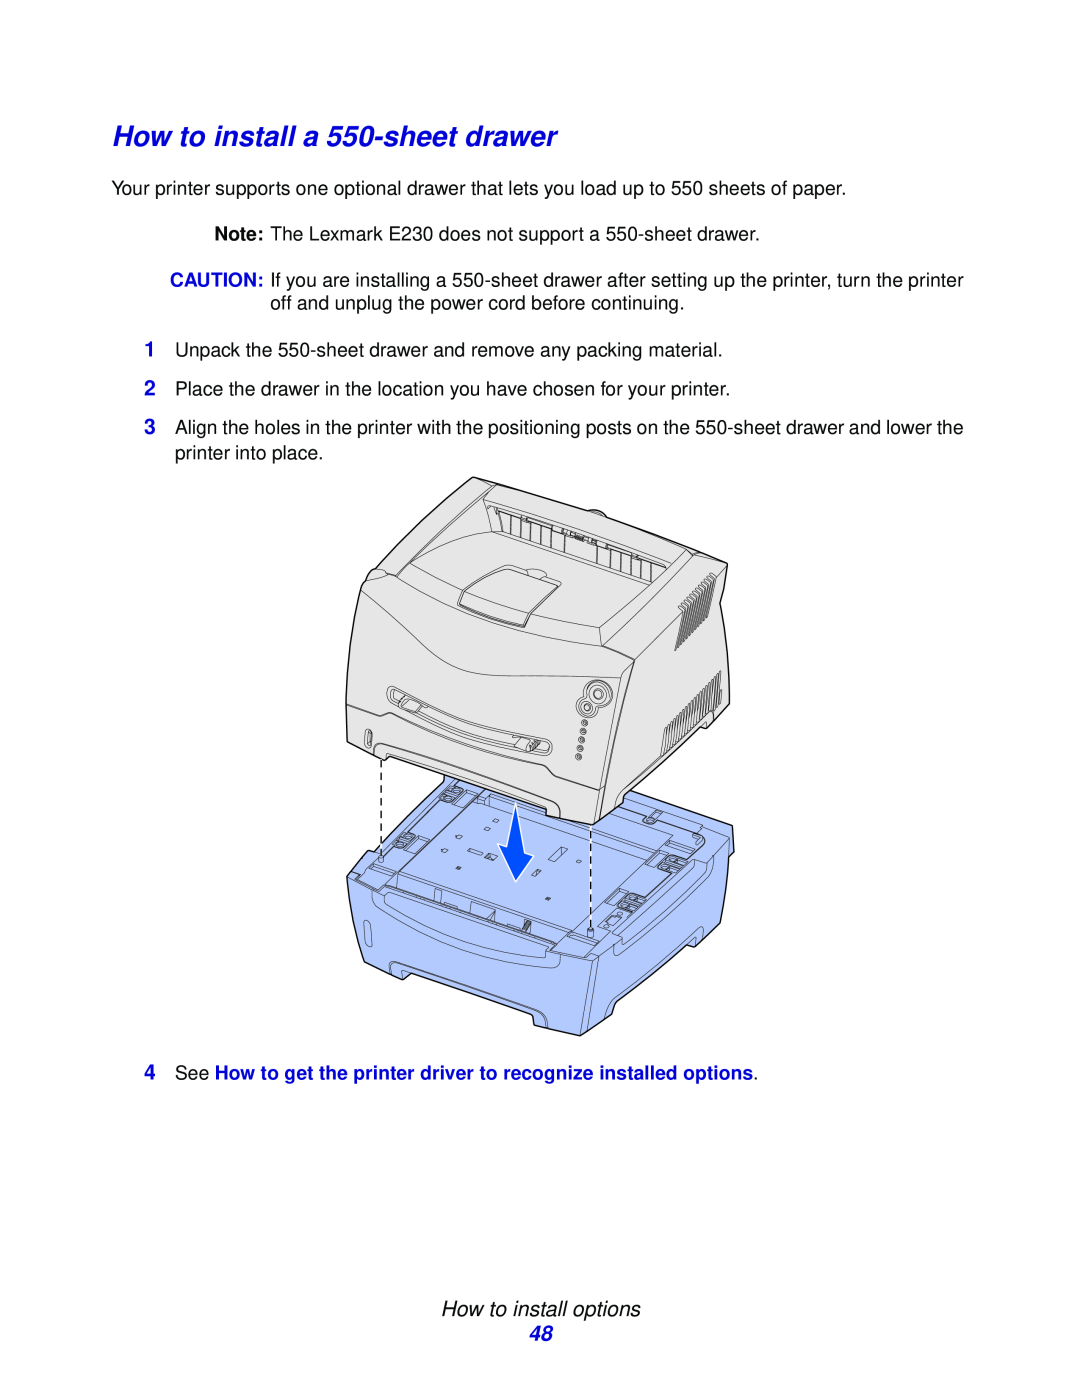 Lexmark 232, E332n, 230 manual How to install a 550-sheet drawer, How to install options 